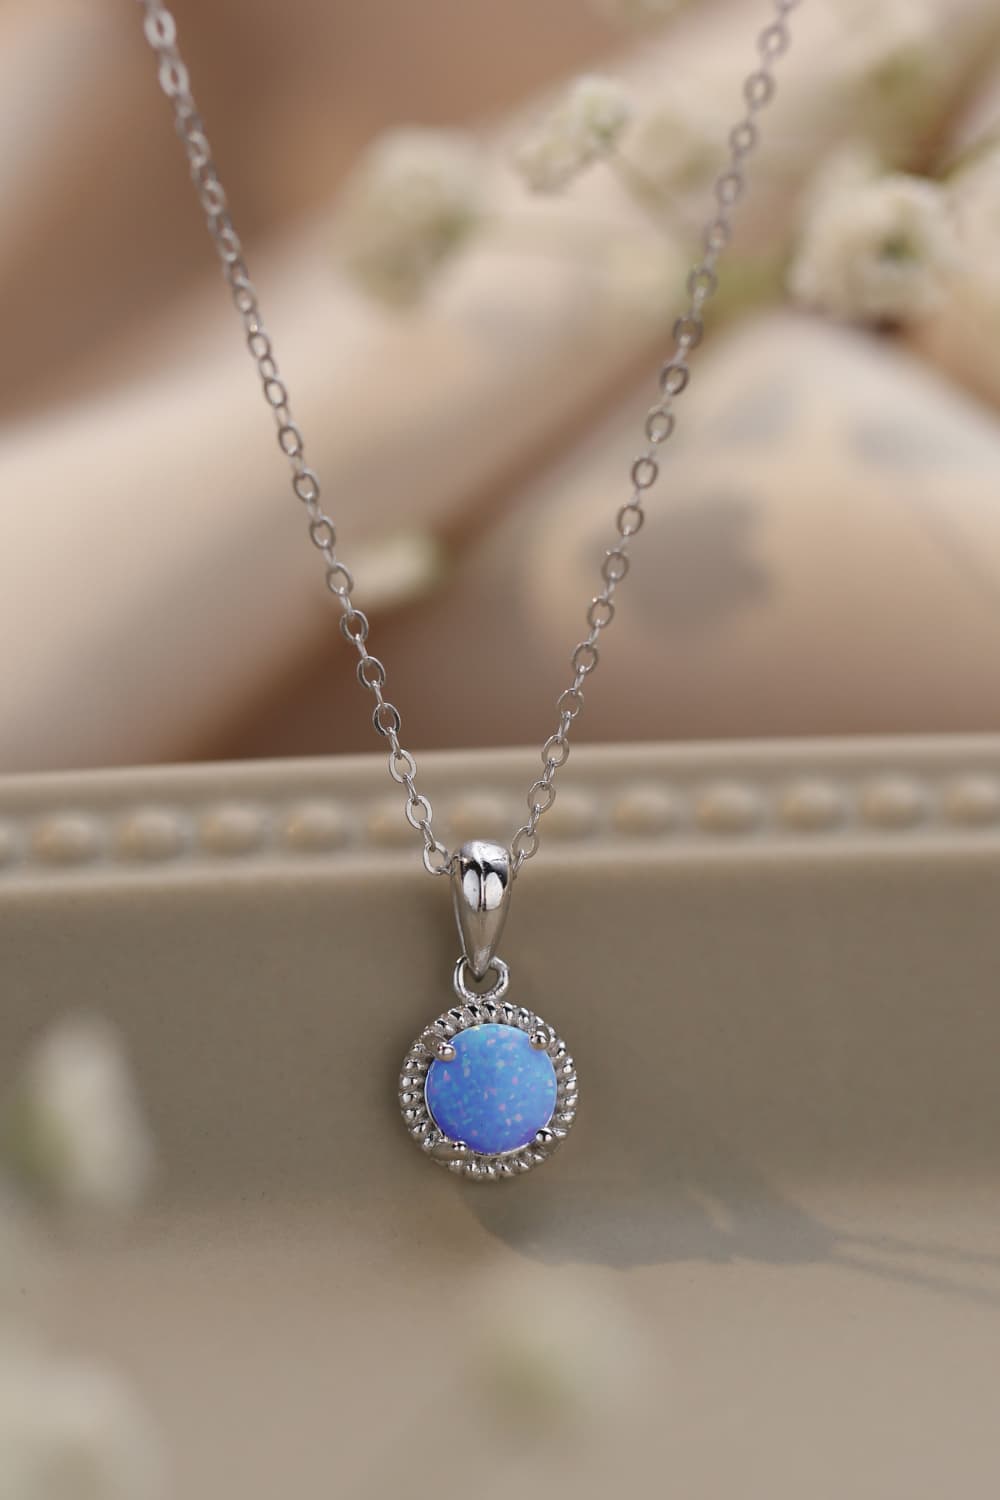 Sterling Chain with Opal Orb Pendant - ZISK Shop  